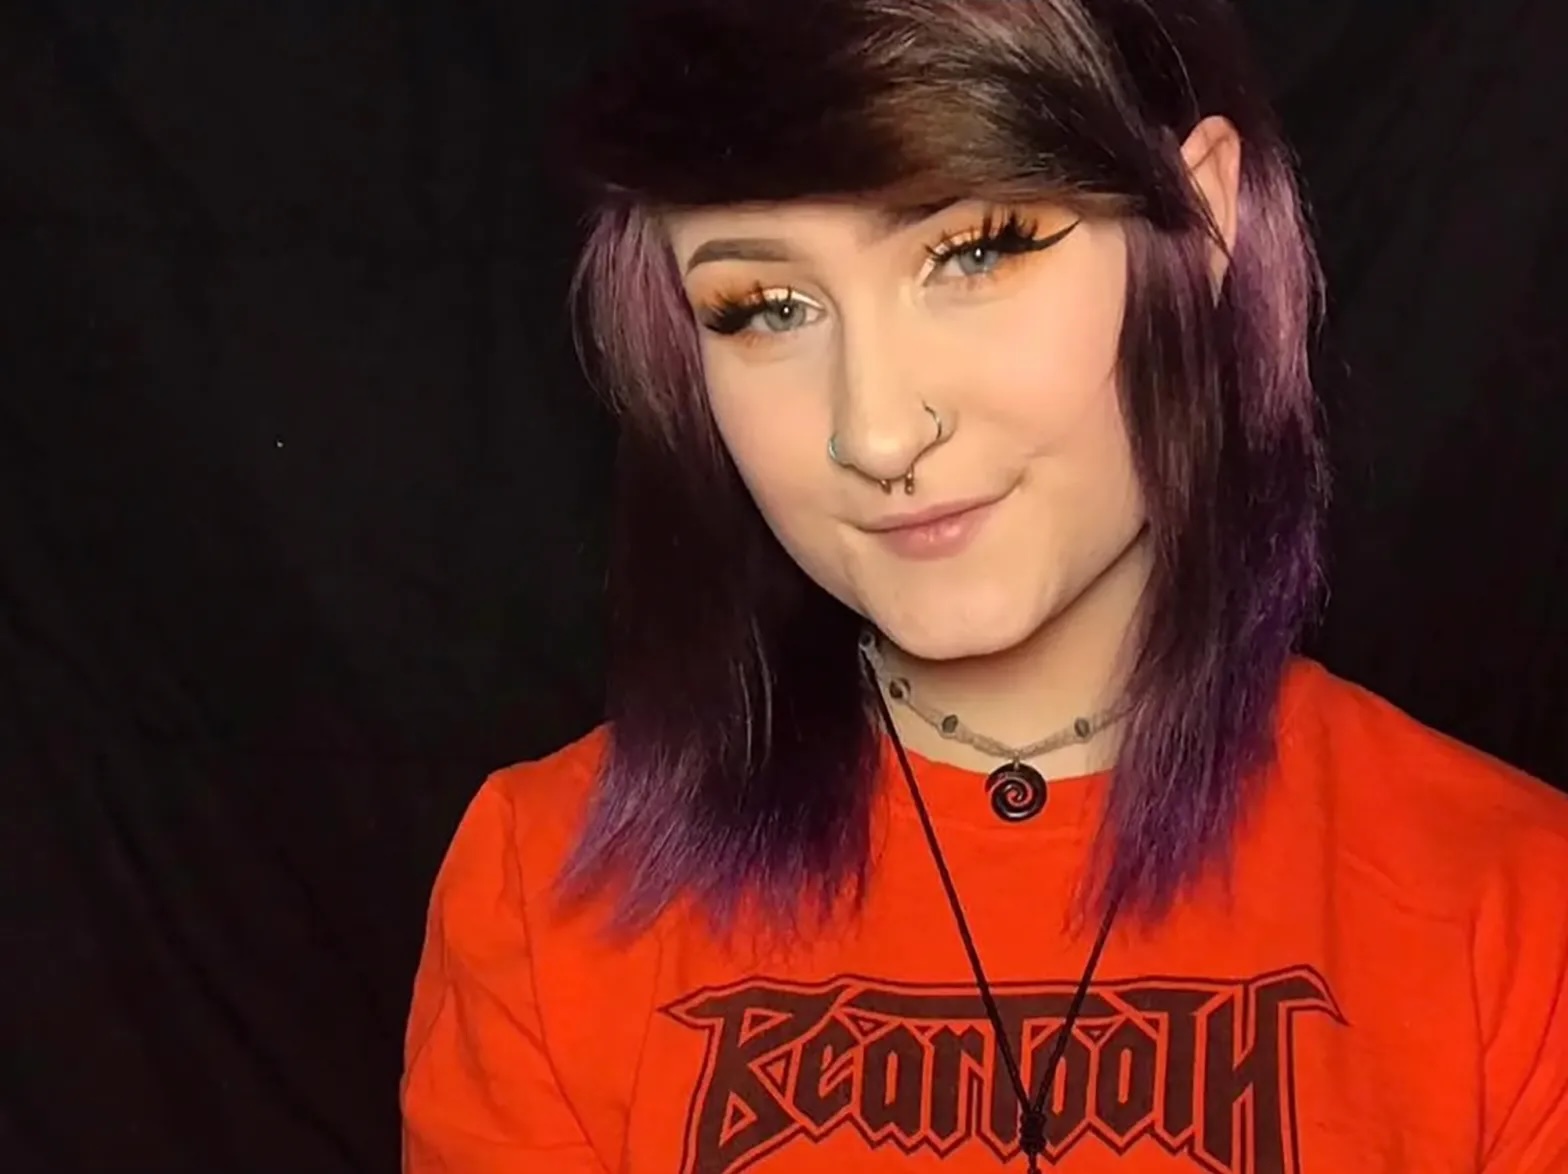 A young person with a red shirt eye makeup, shoulder-length hair and necklaces and a nose piercing, smiles at the camera.